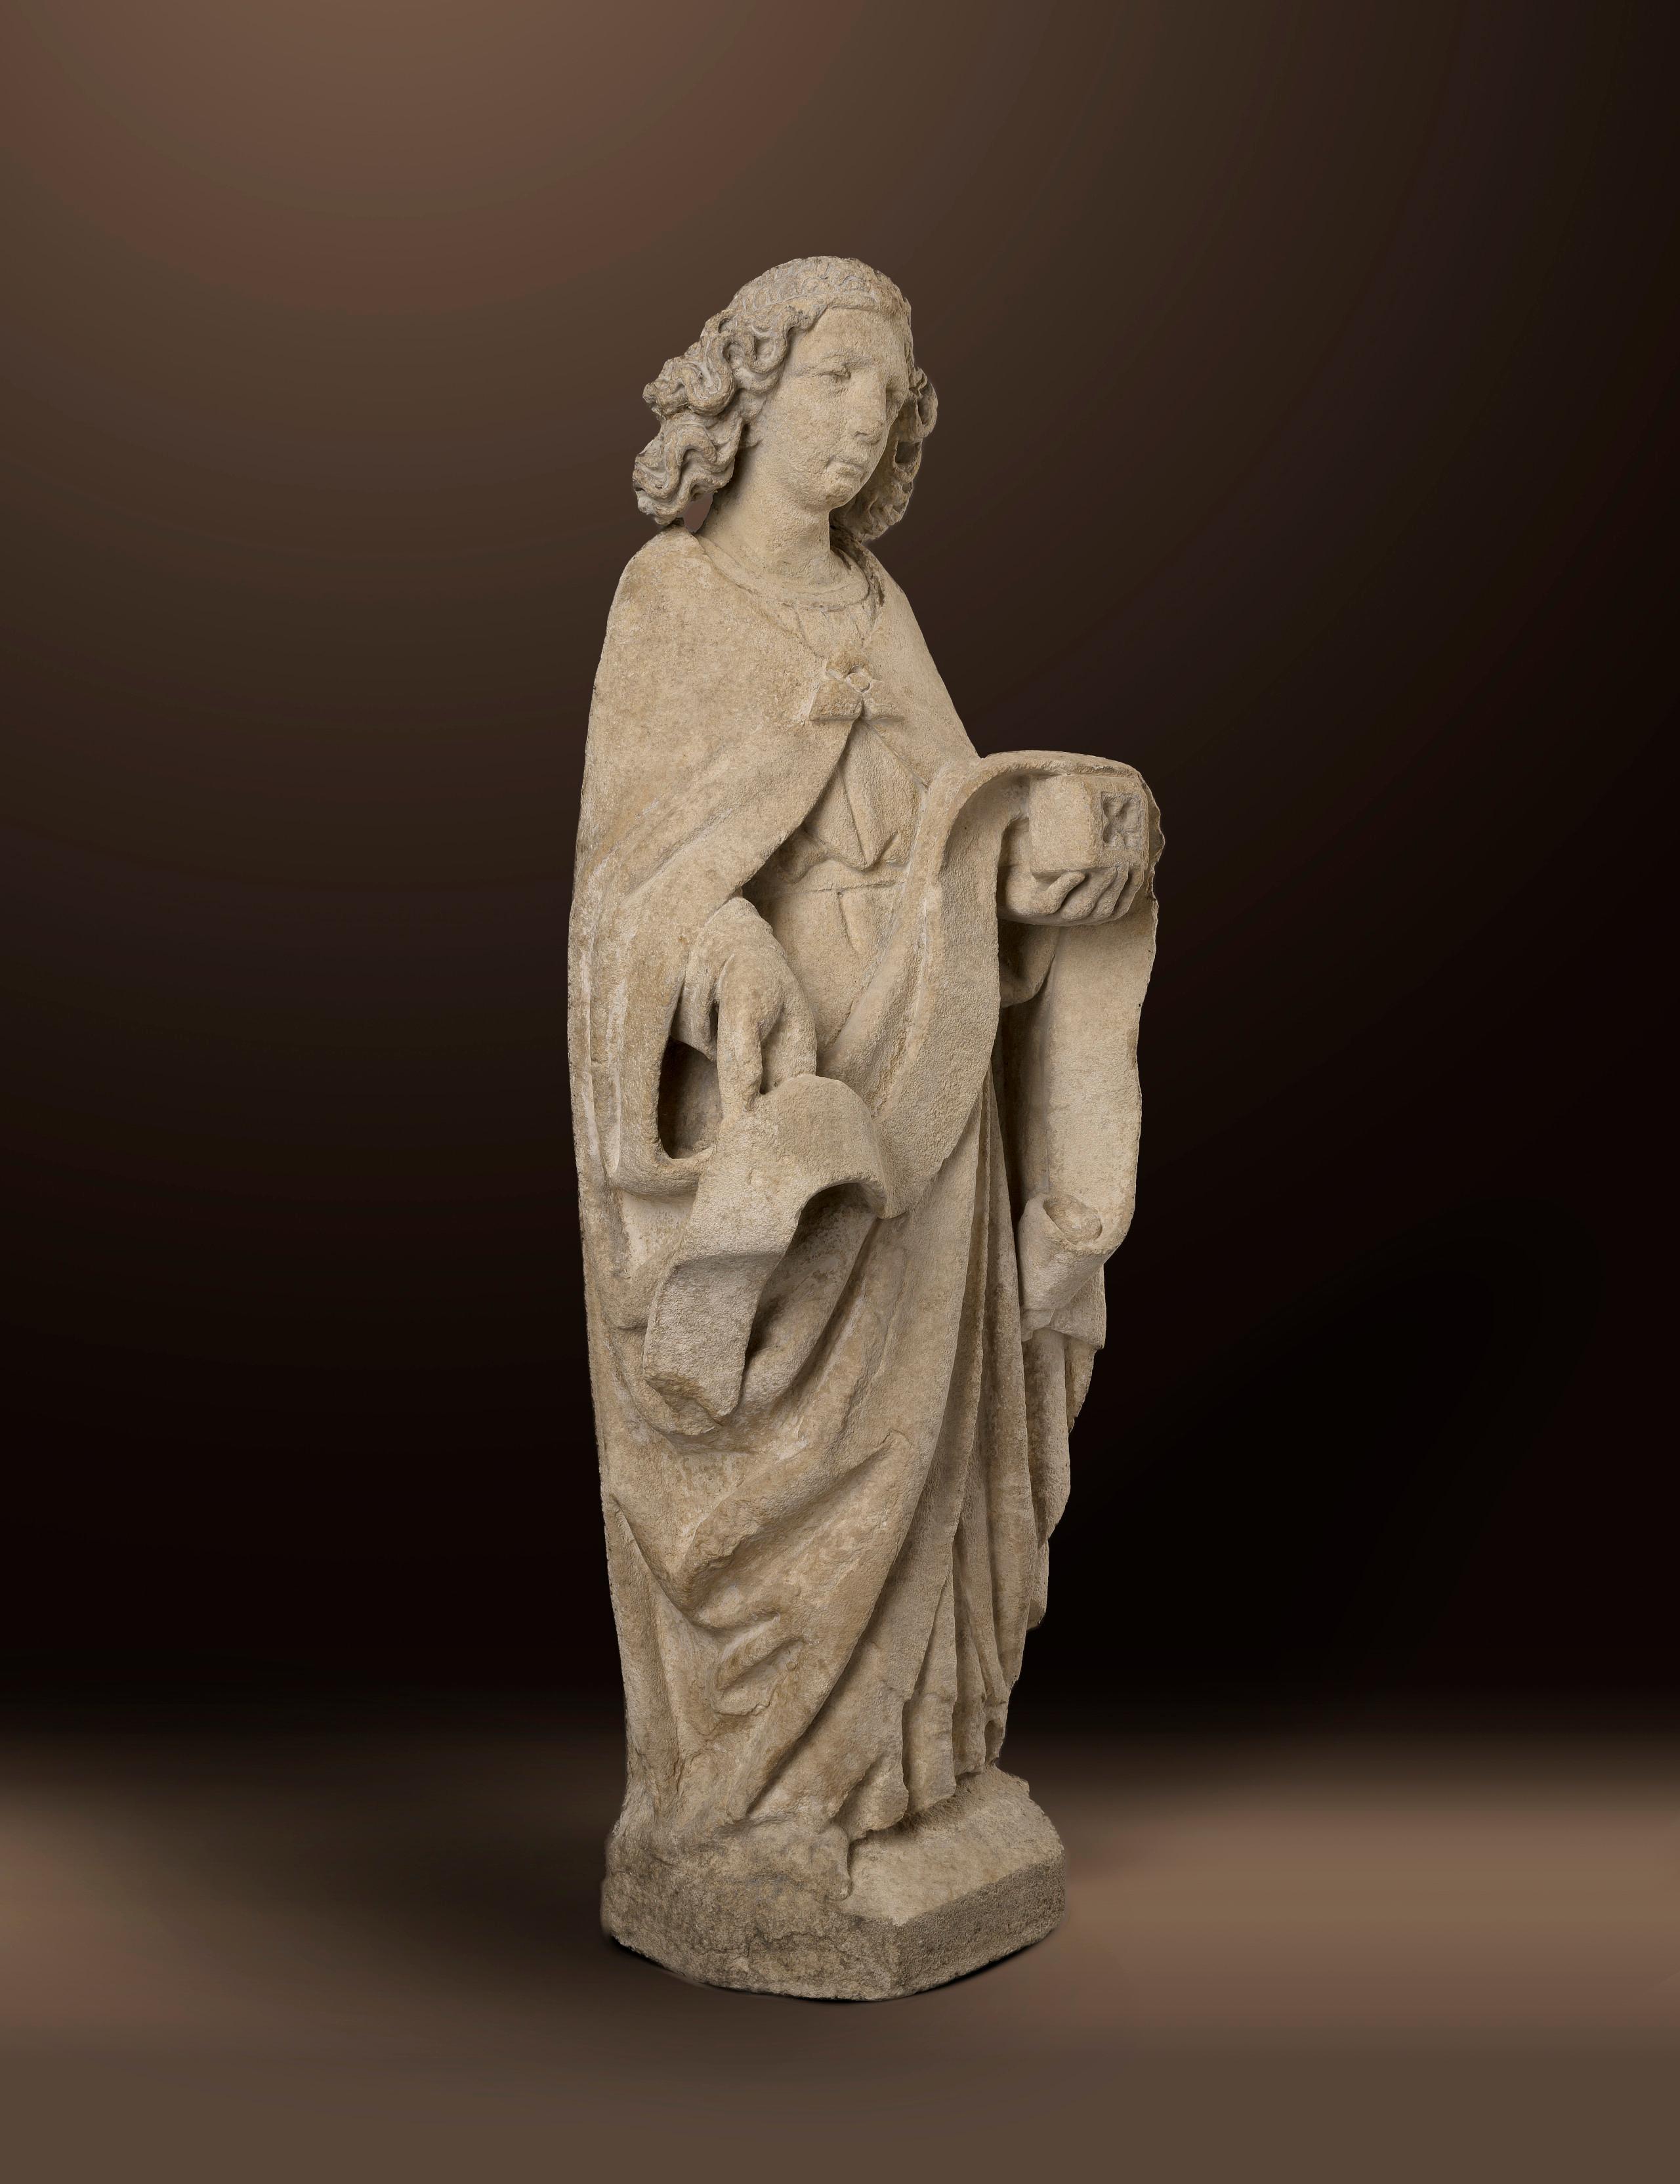 Standing angel with banner
Flemish
Around 1450/60

Sandstone
60 x 21 x 15 cm

This museum figurine shows a standing angel with a banner in his right hand and a small box in his left. The youthful, ageless figure wears a coat held together with a